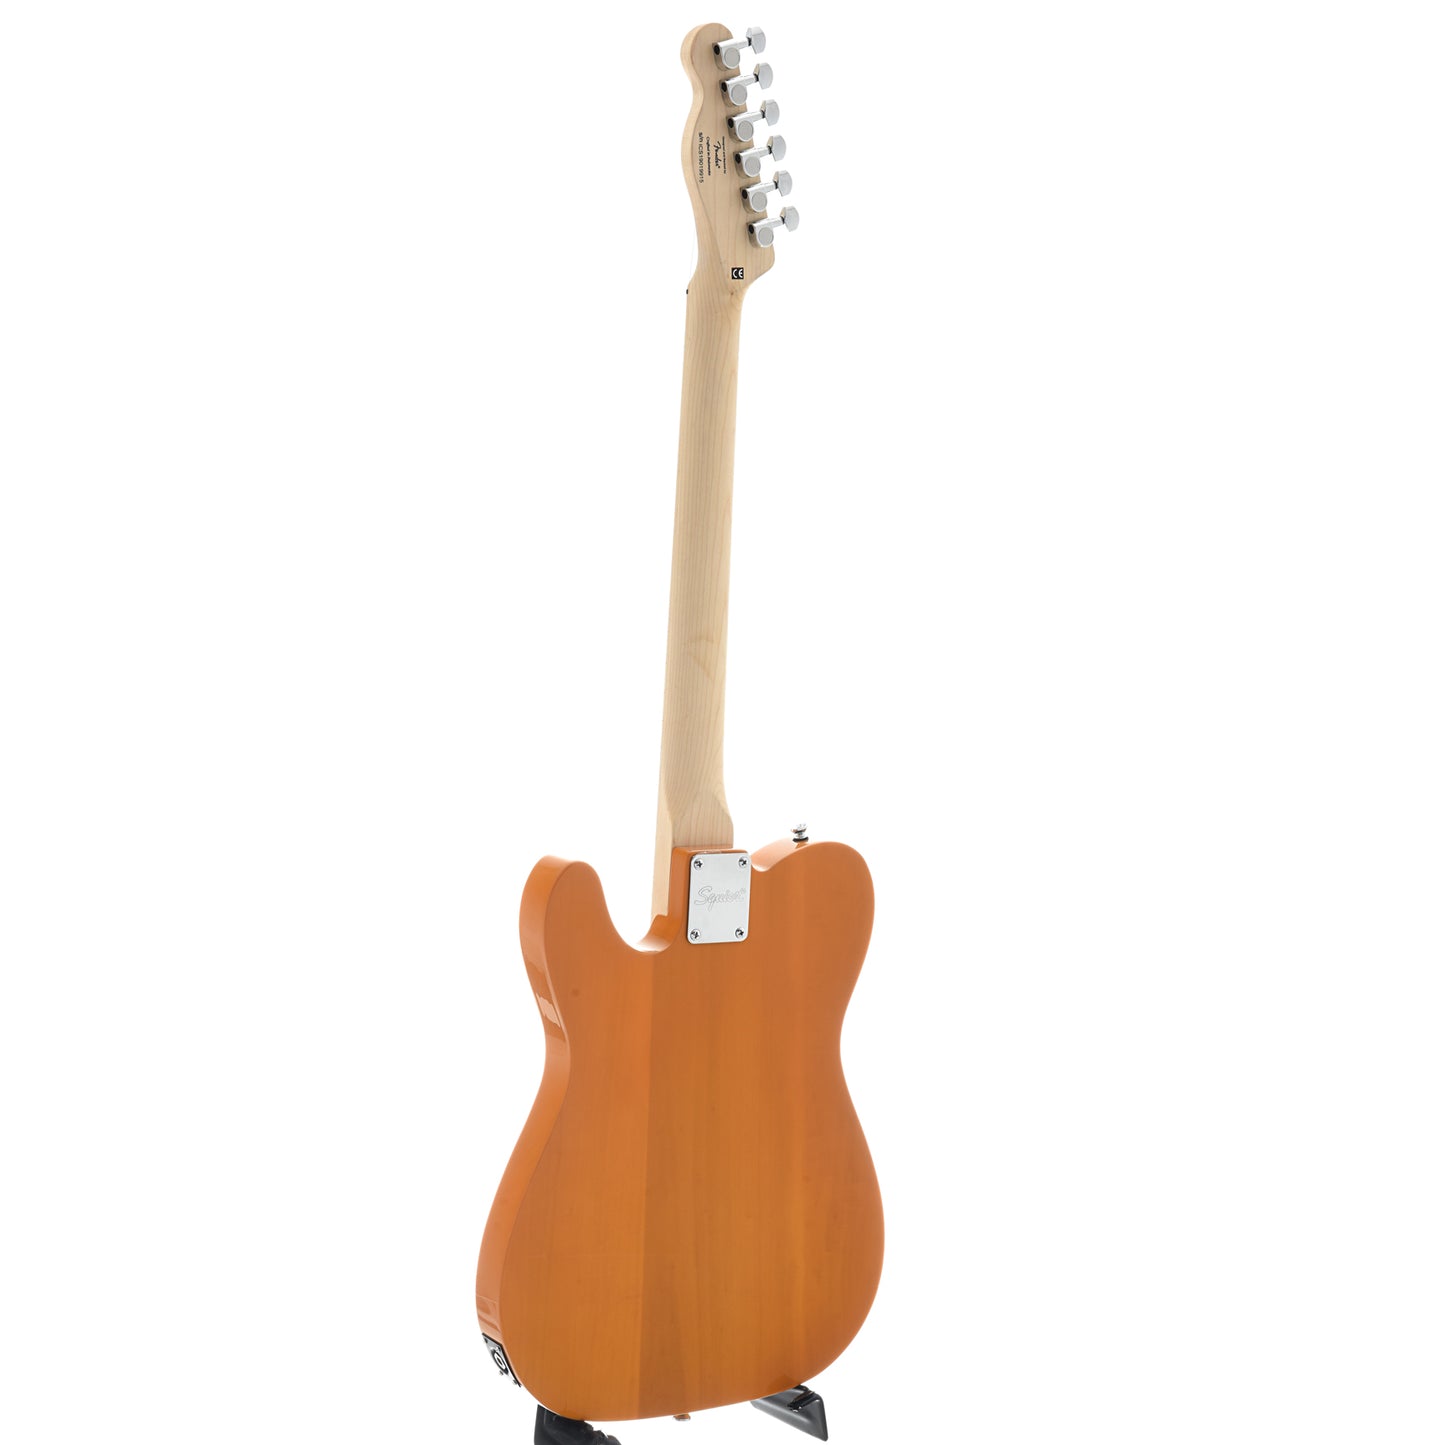 Full back and side of Squier Affinity Telecaster